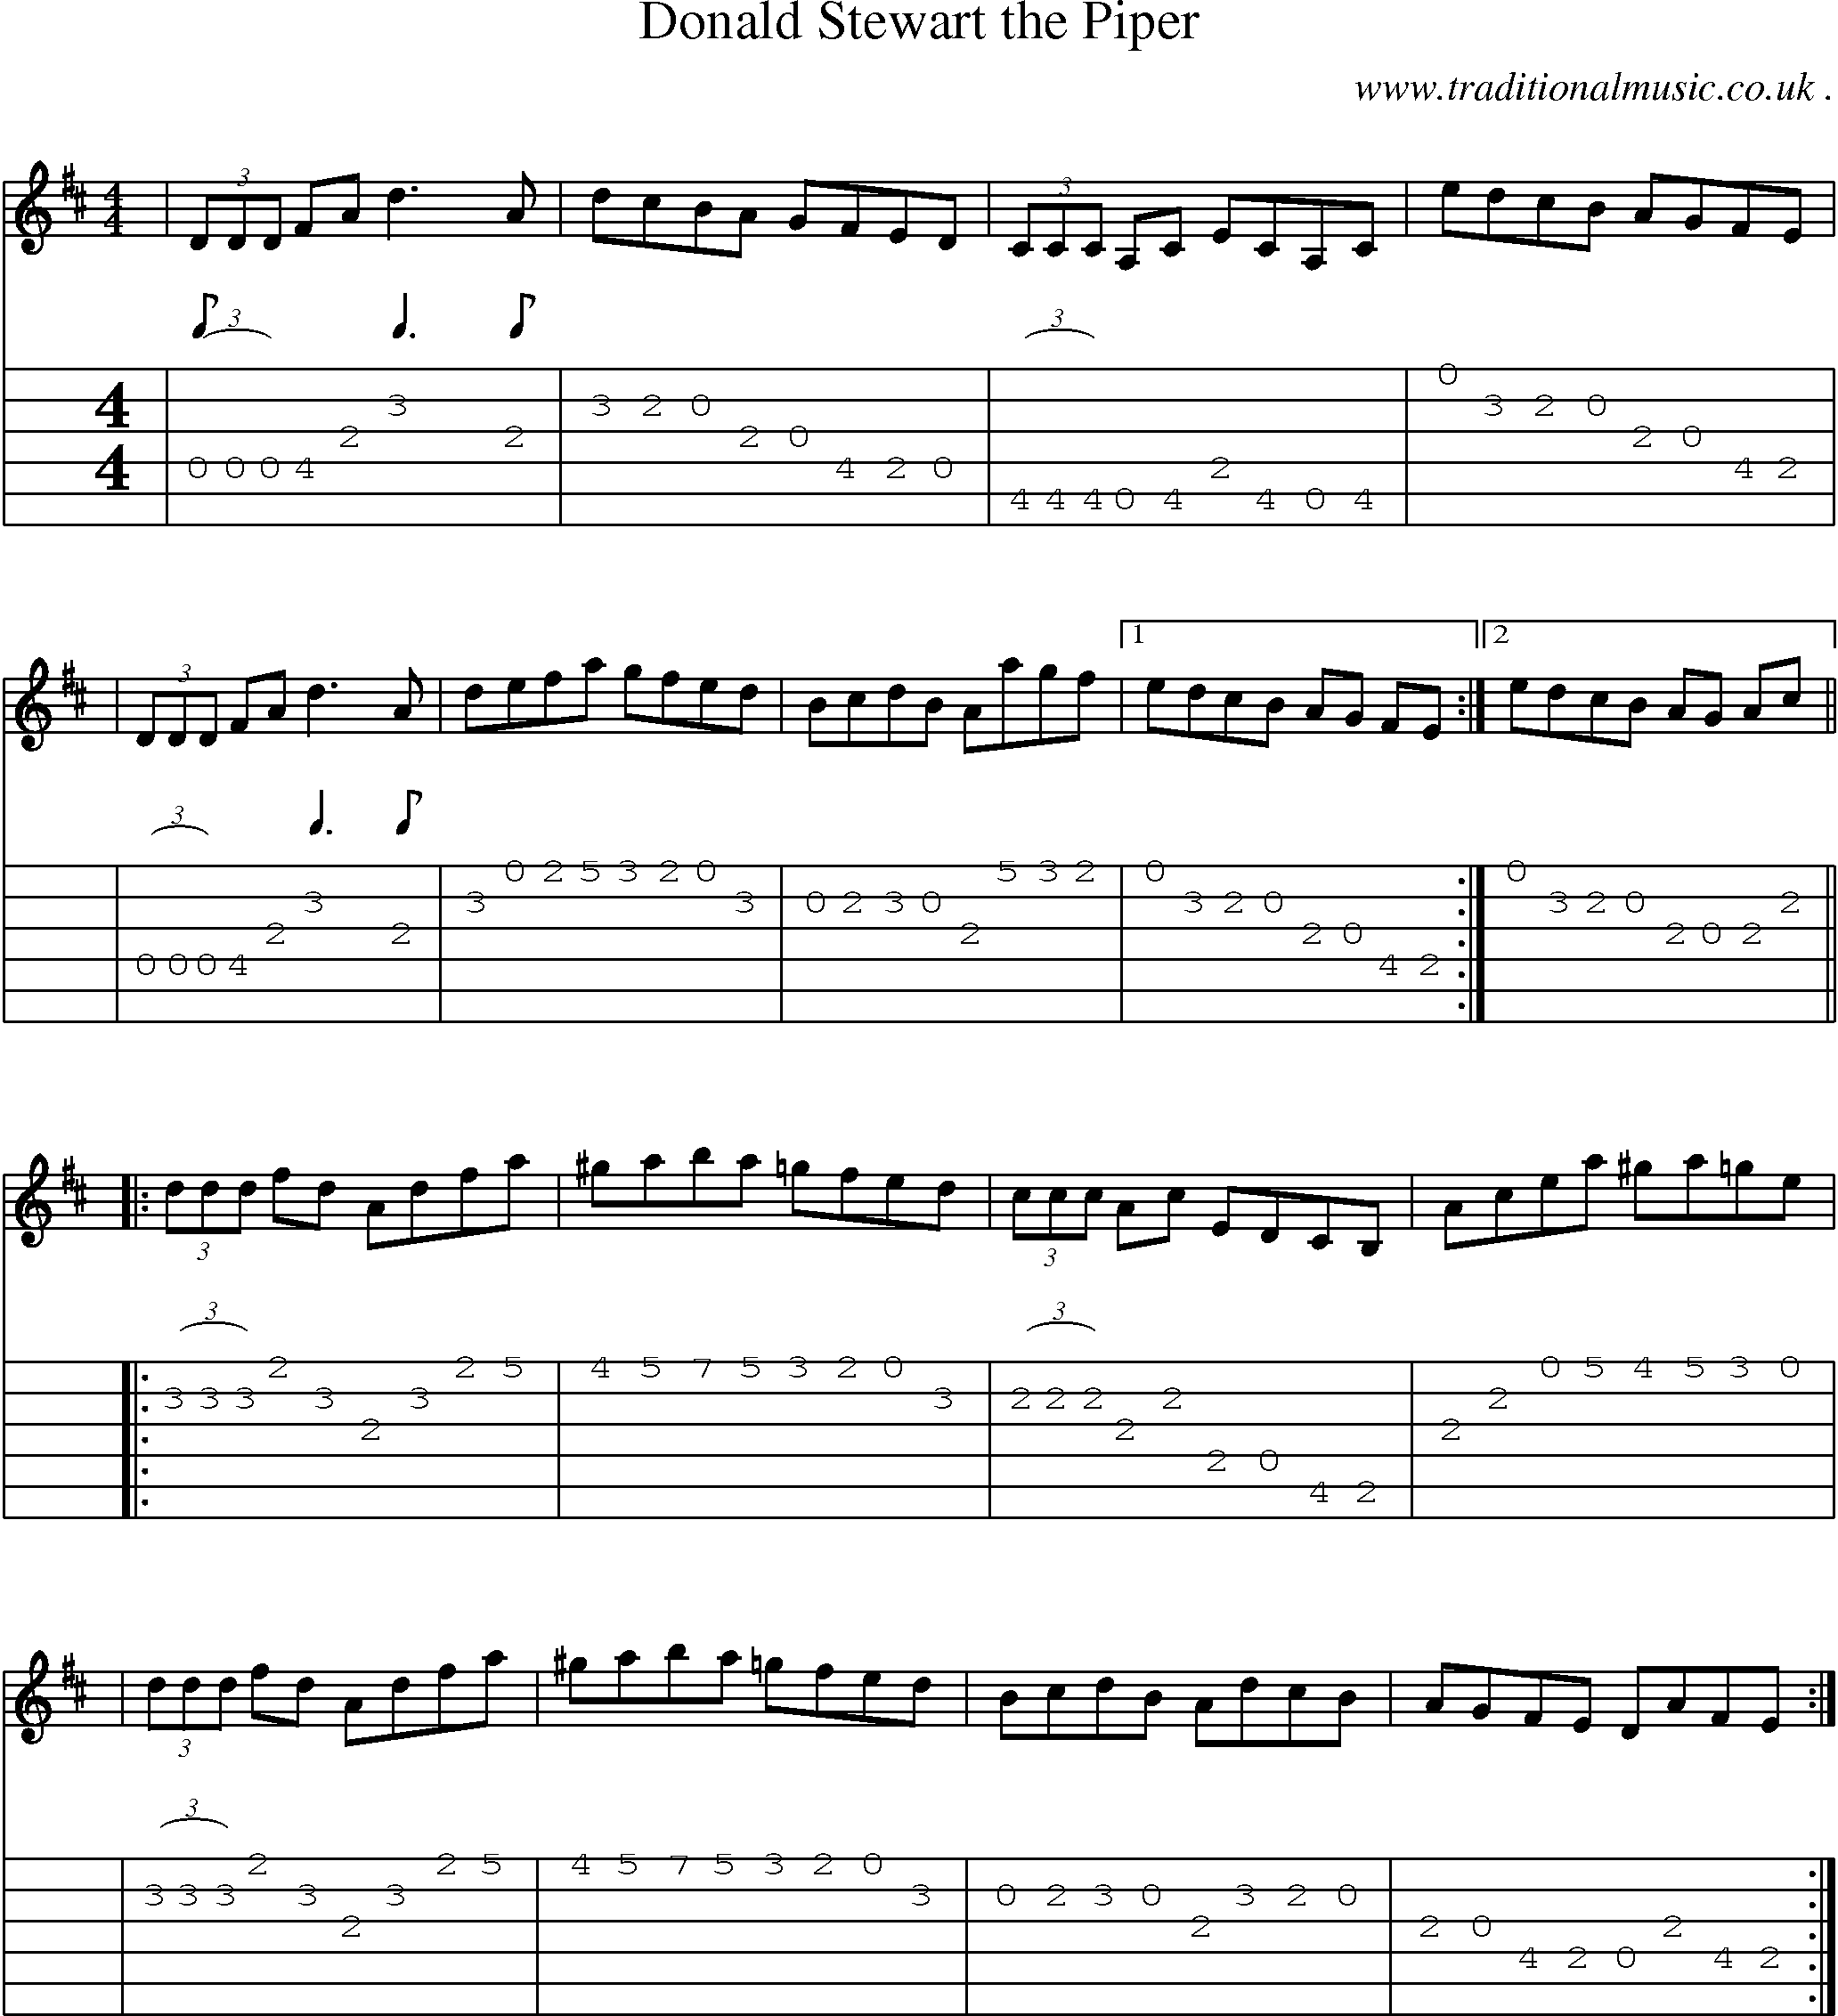 Sheet-music  score, Chords and Guitar Tabs for Donald Stewart The Piper